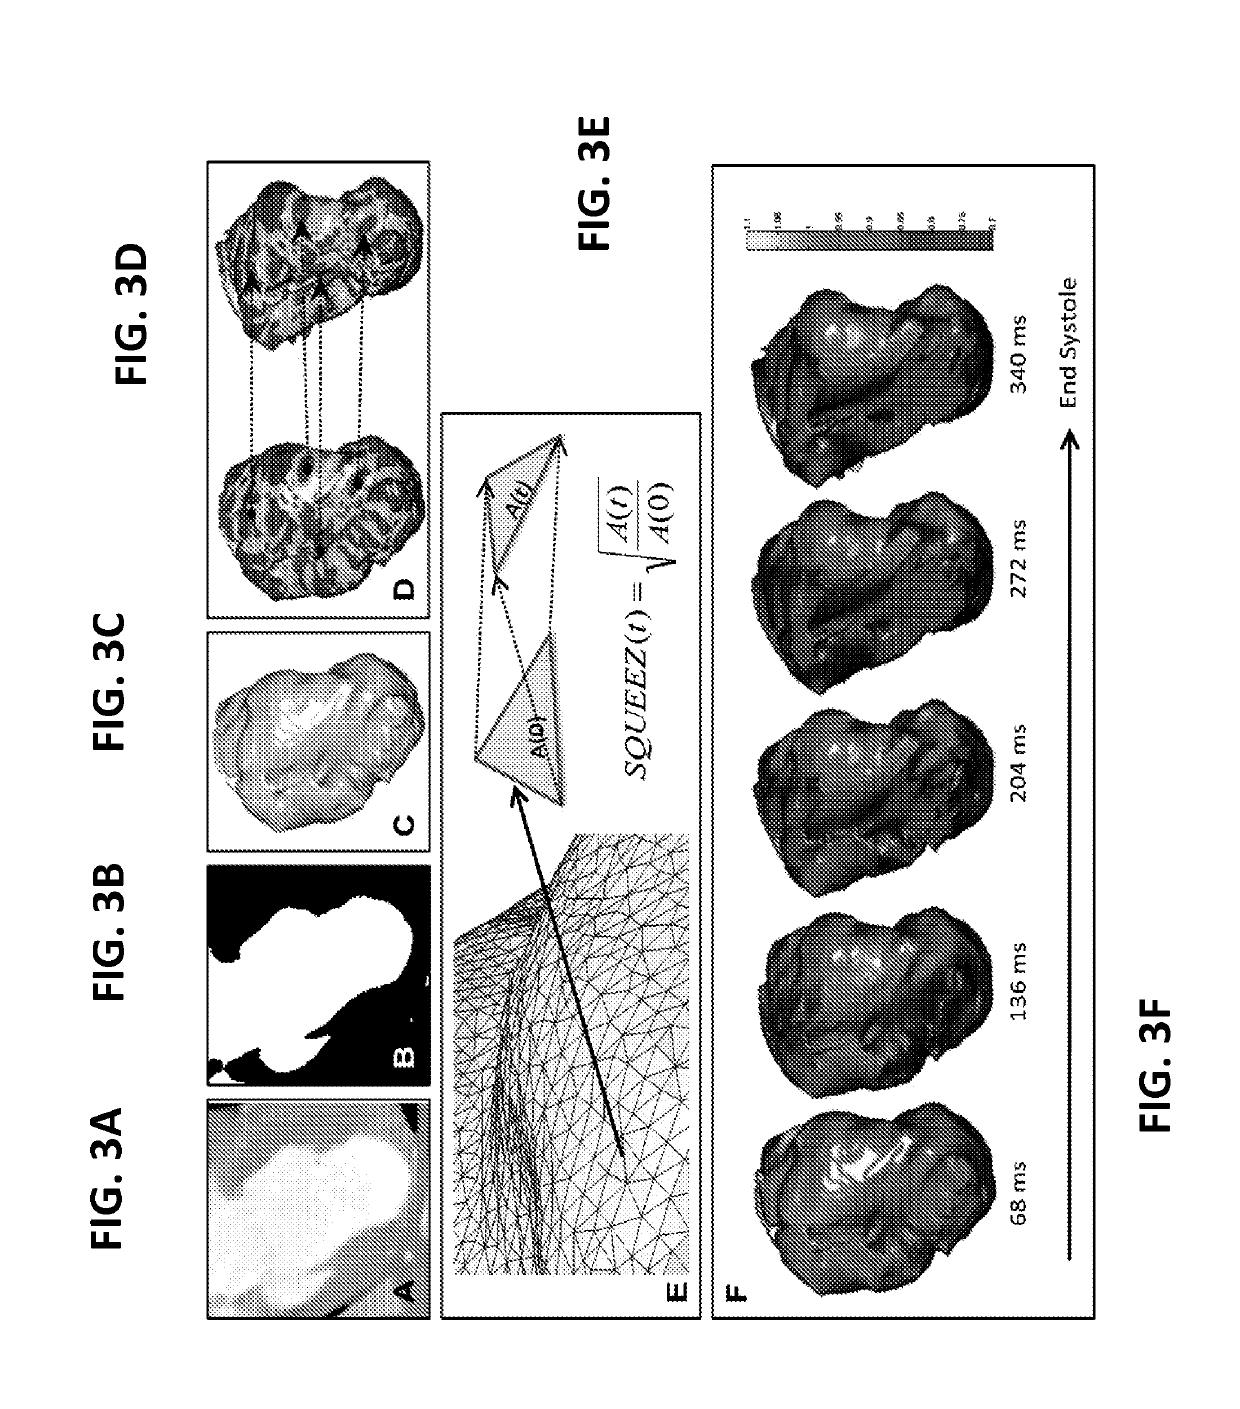 Methods for evaluating regional cardiac function and dyssynchrony from a dynamic imaging modality using endocardial motion